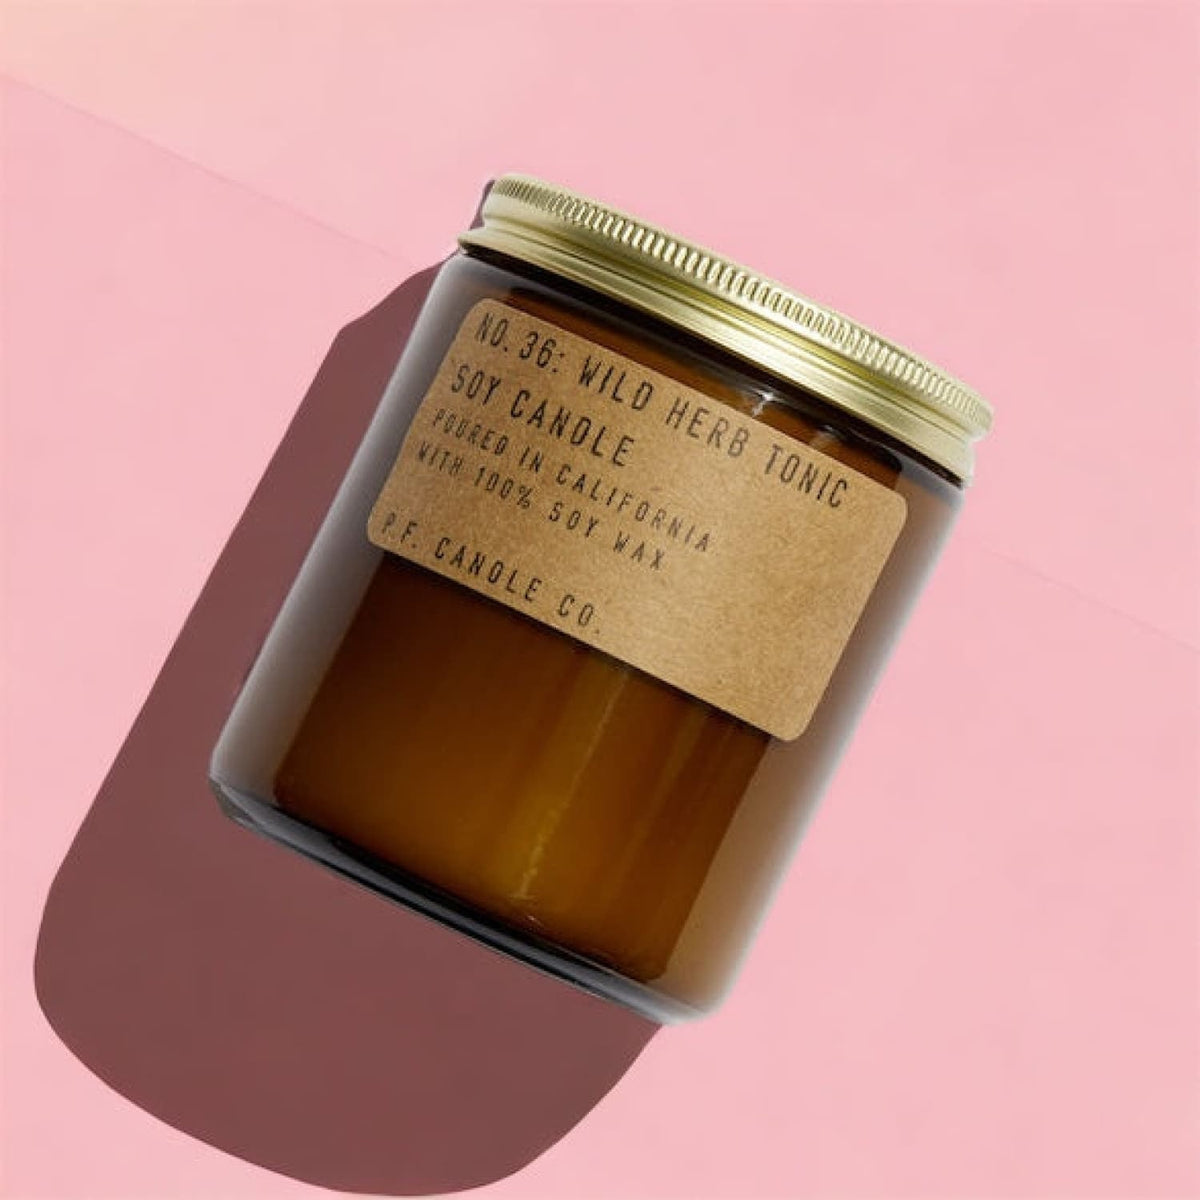 P.f. Candle Co. - Wild Herb Tonic Candle - Cruelty Free -